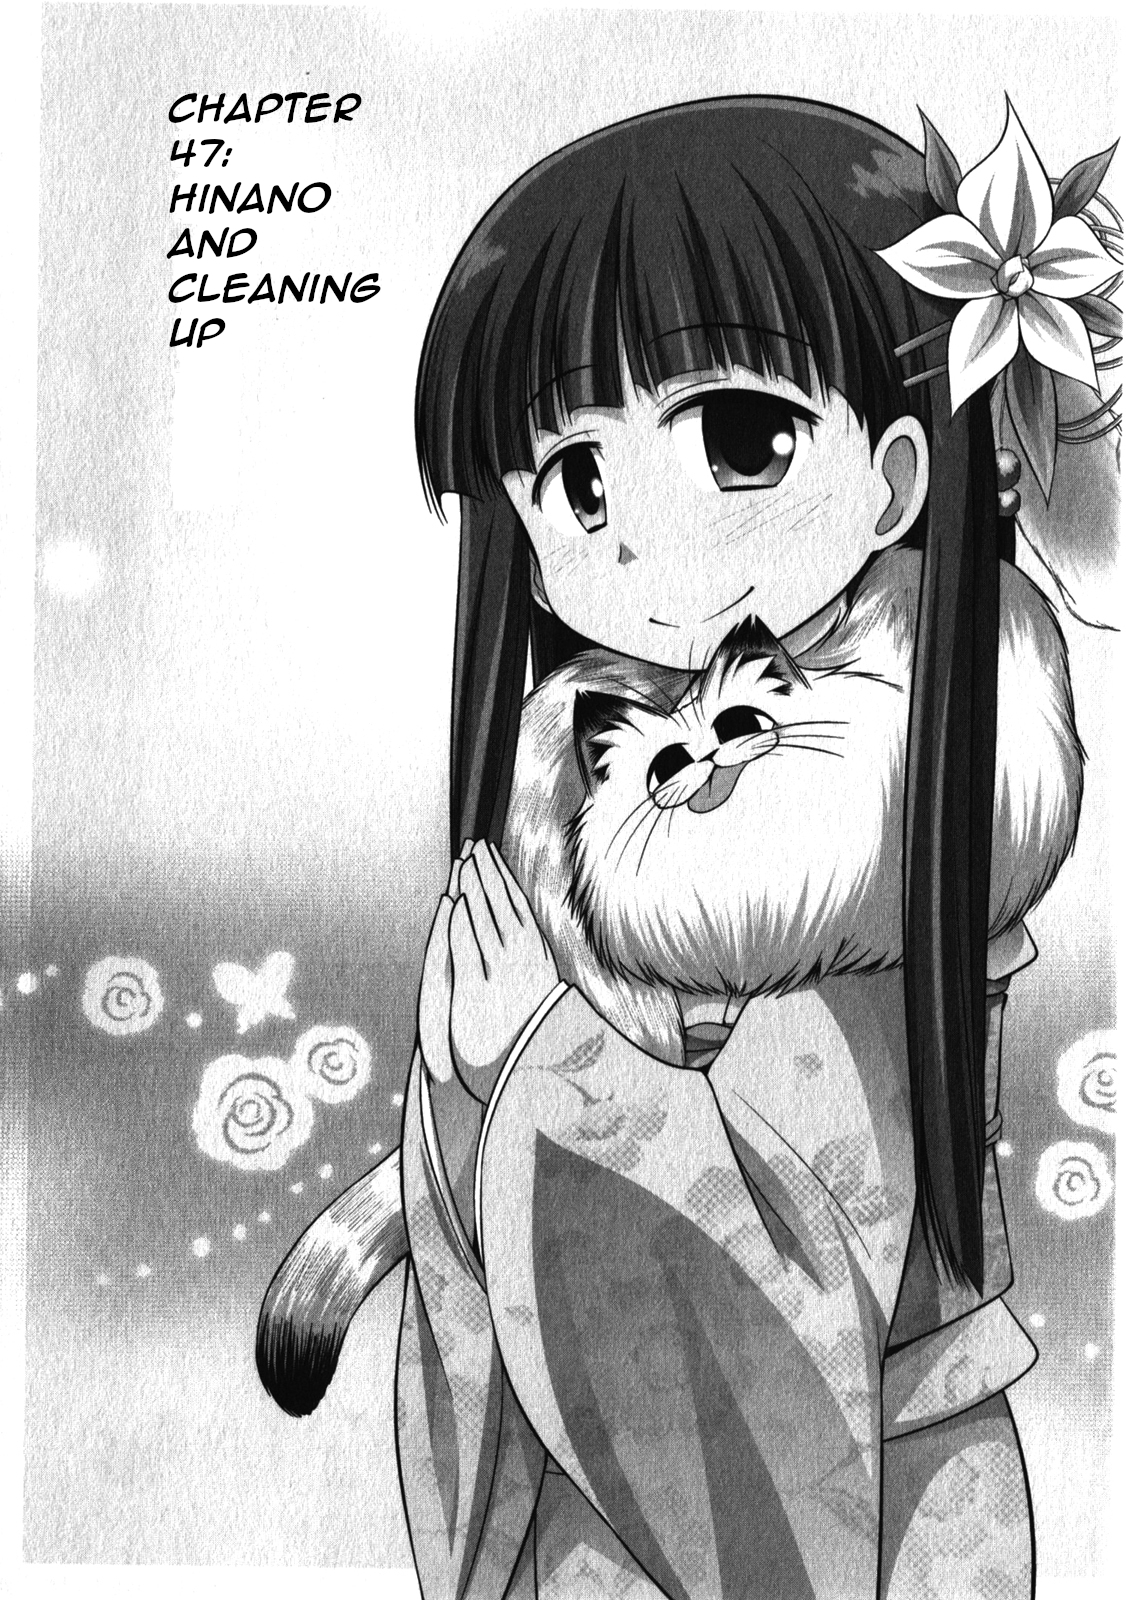 Tonnura san Vol. 9 Ch. 47 Hinano and Cleaning Up